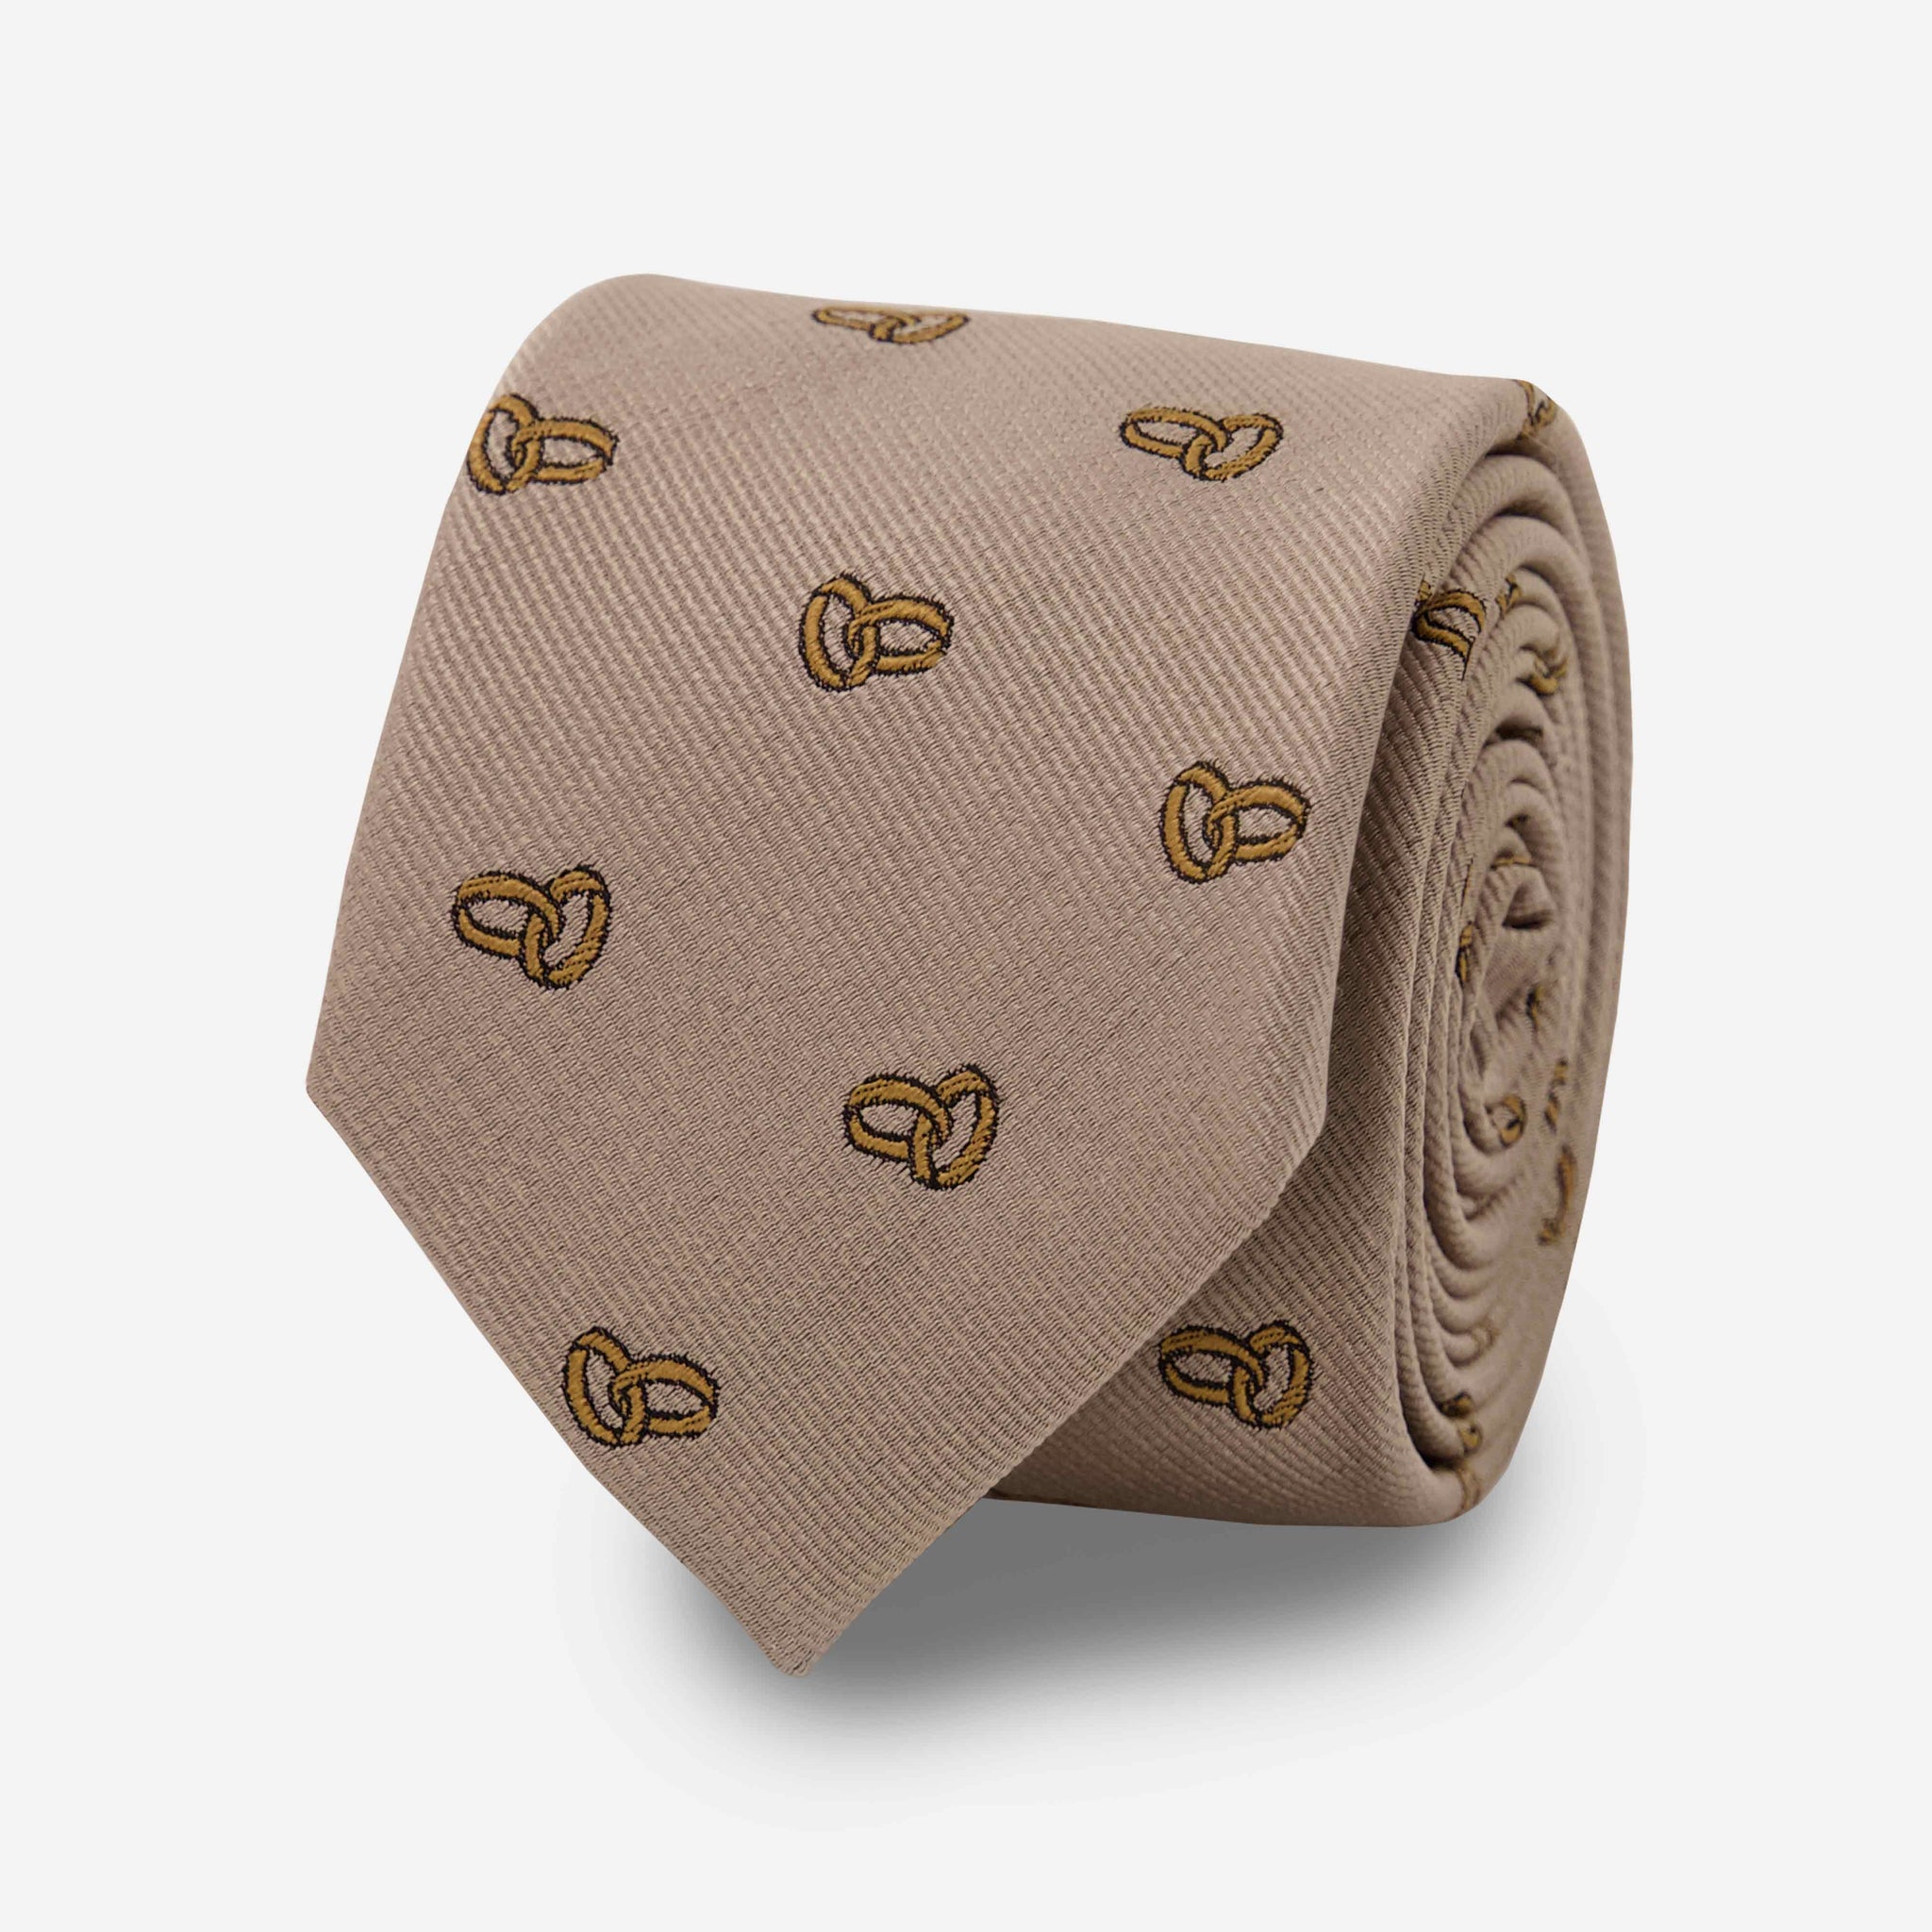 Put A Ring On It Champagne Tie by Tie Bar